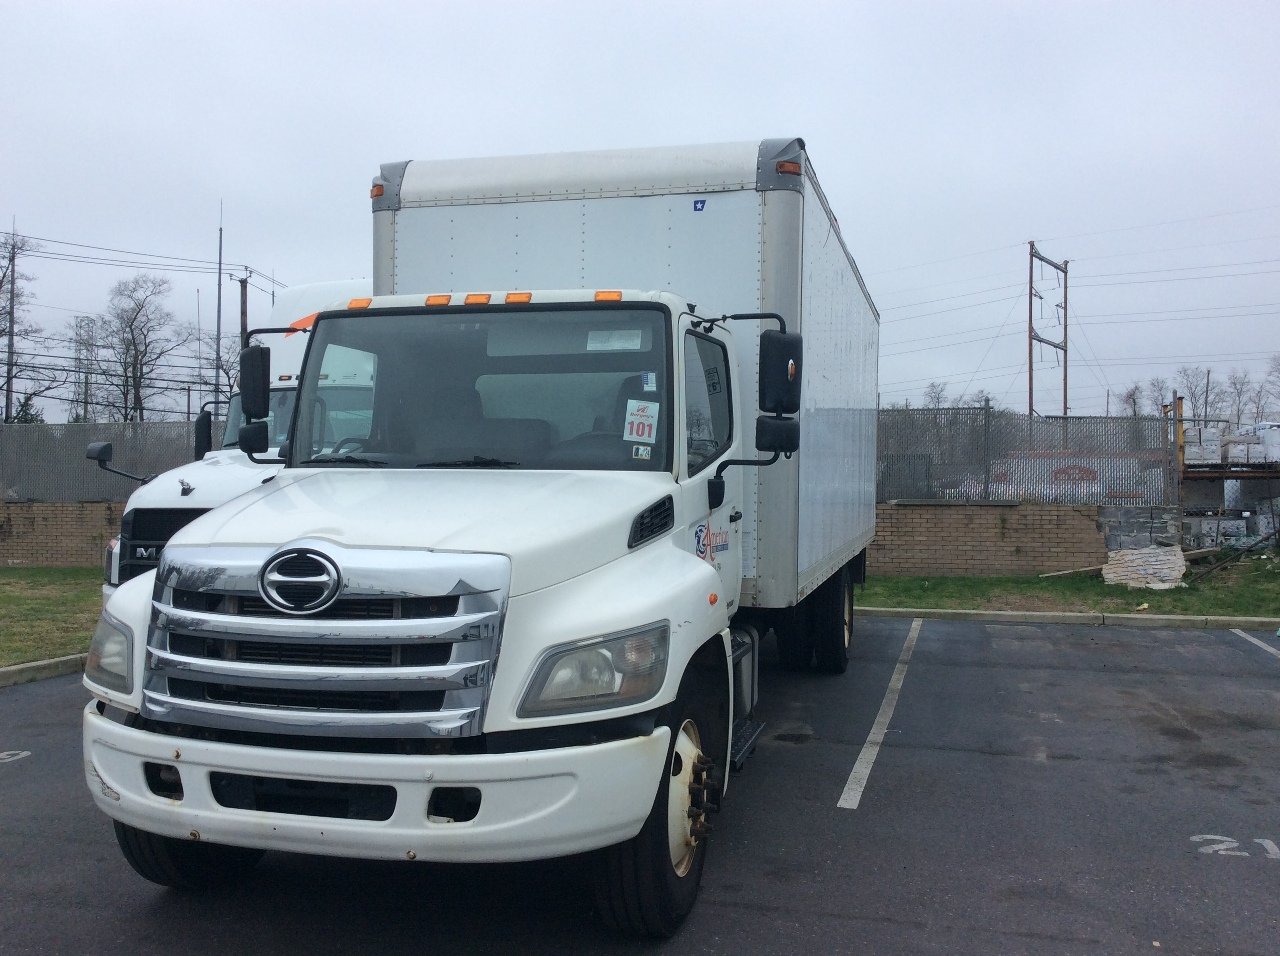 Used Truck Inventory - 1001821 01 2 - 97